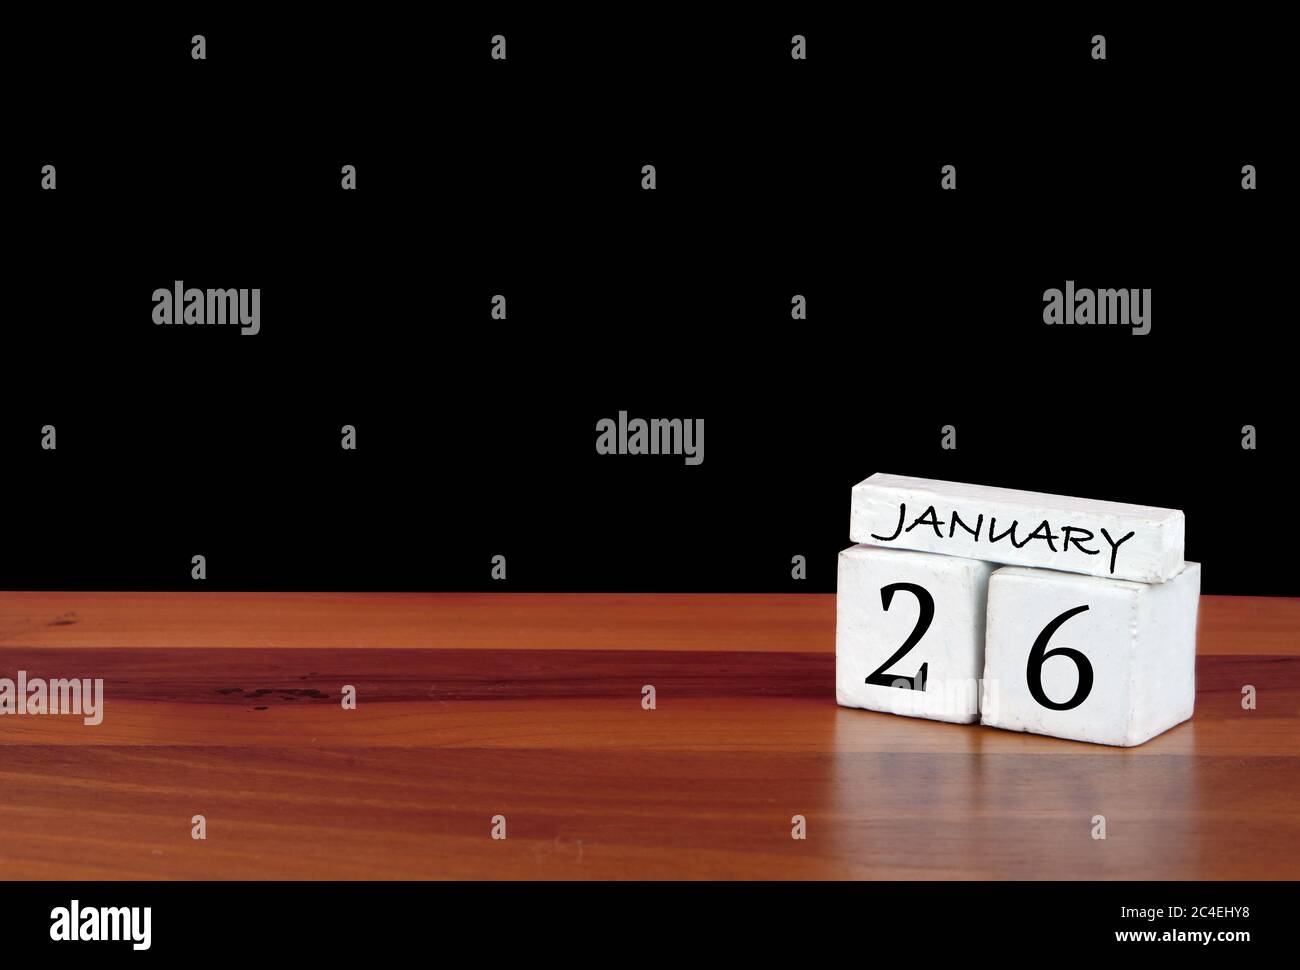 26 January calendar month. 26 days of the month. Reflected calendar on wooden floor with black background Stock Photo